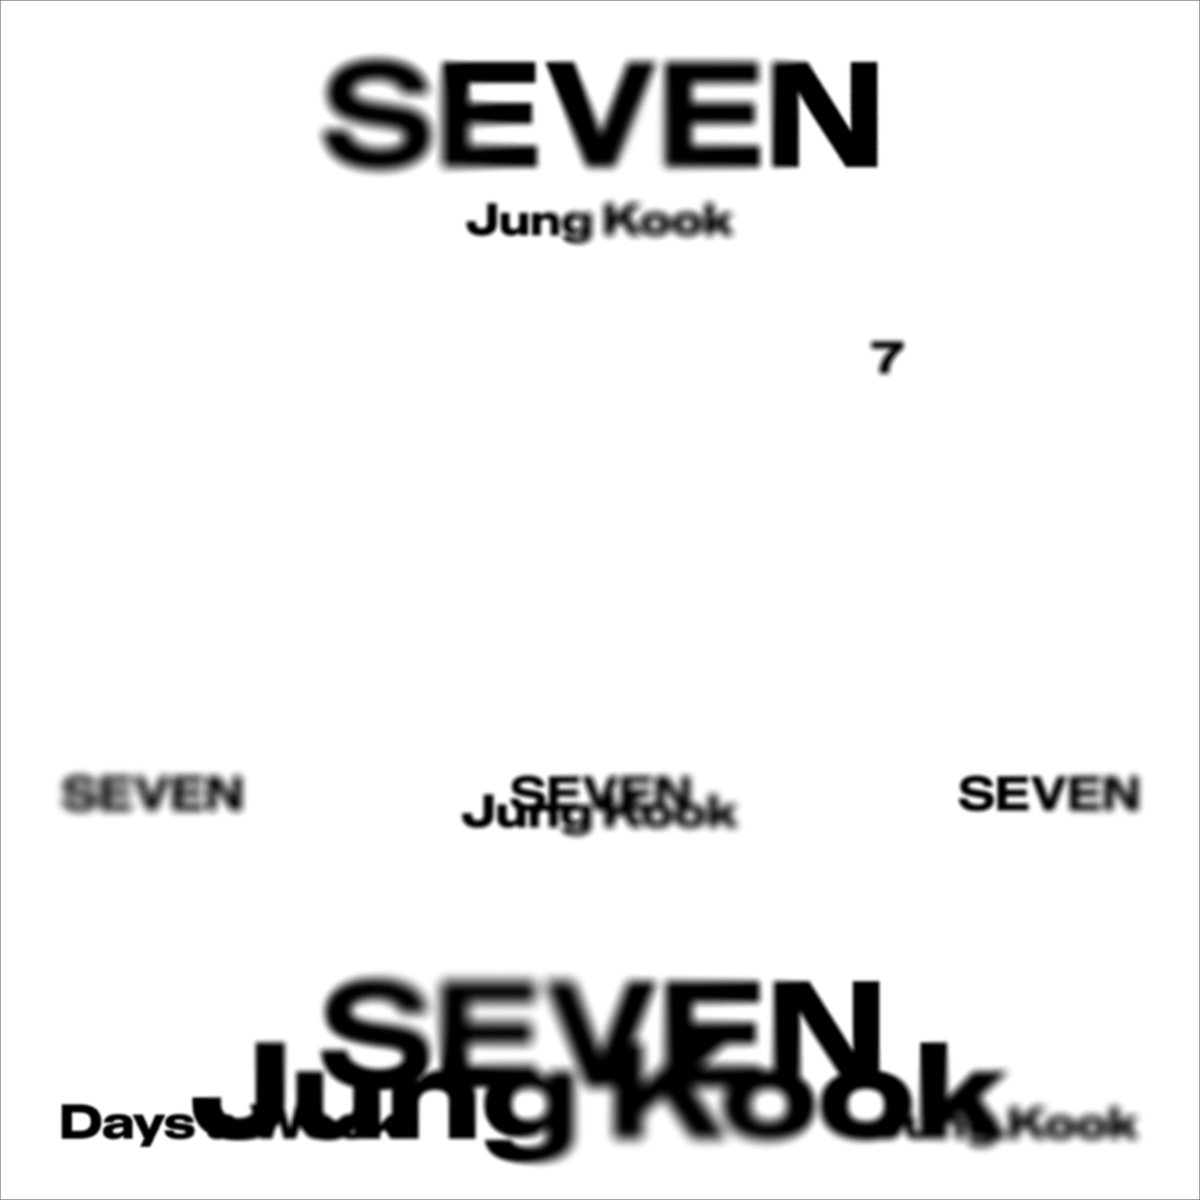 JungKook’s “Seven (feat. Latto)” has been certified Platinum in the United States for selling over 1 million units.